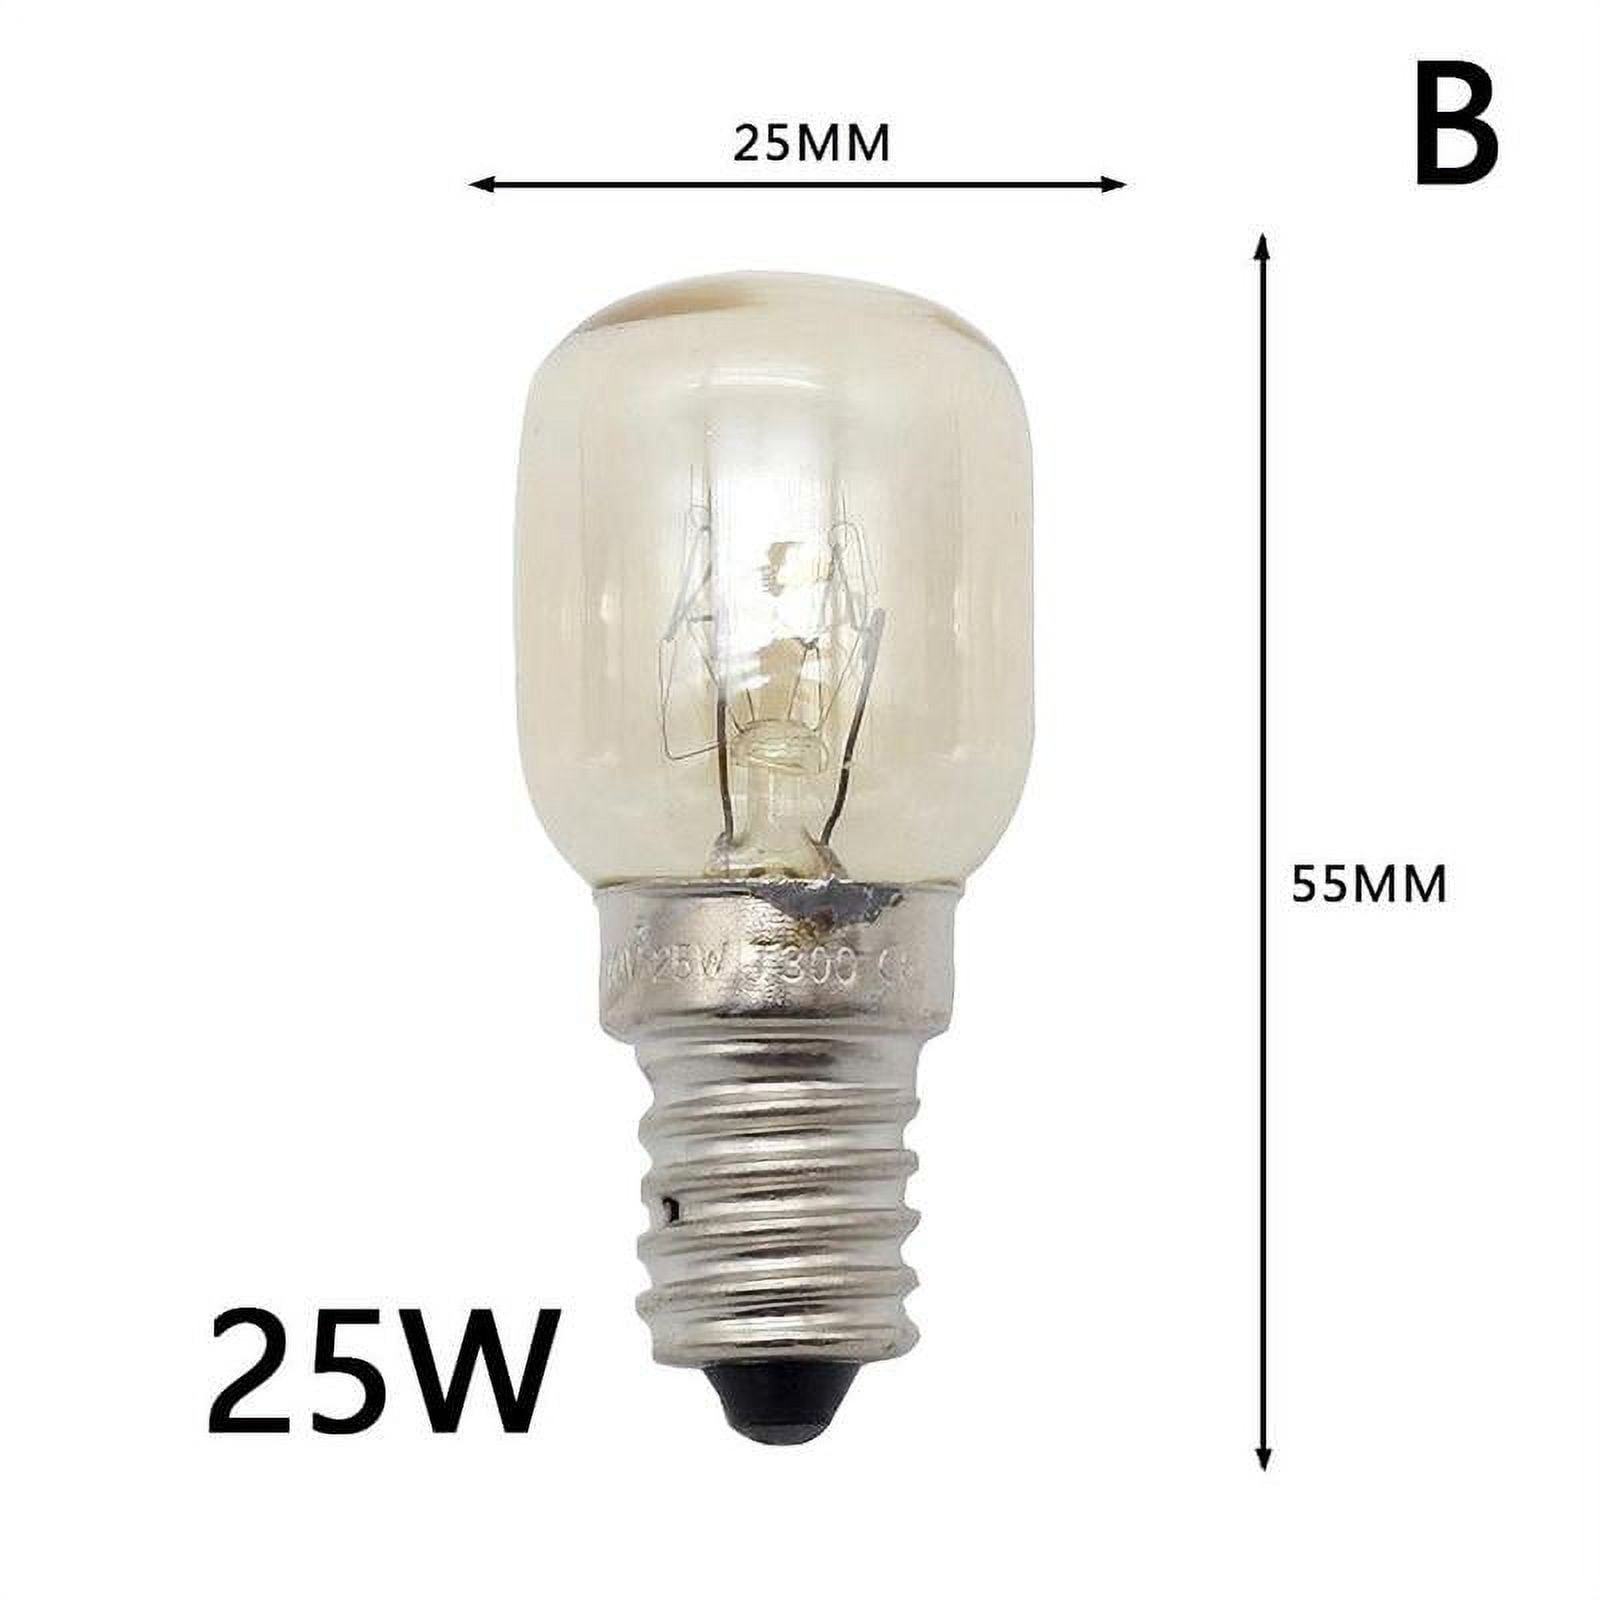 Oven Light Cooker Microwave Bulb SES E14 15W 25W High Temperature 220V Lamp  RD38